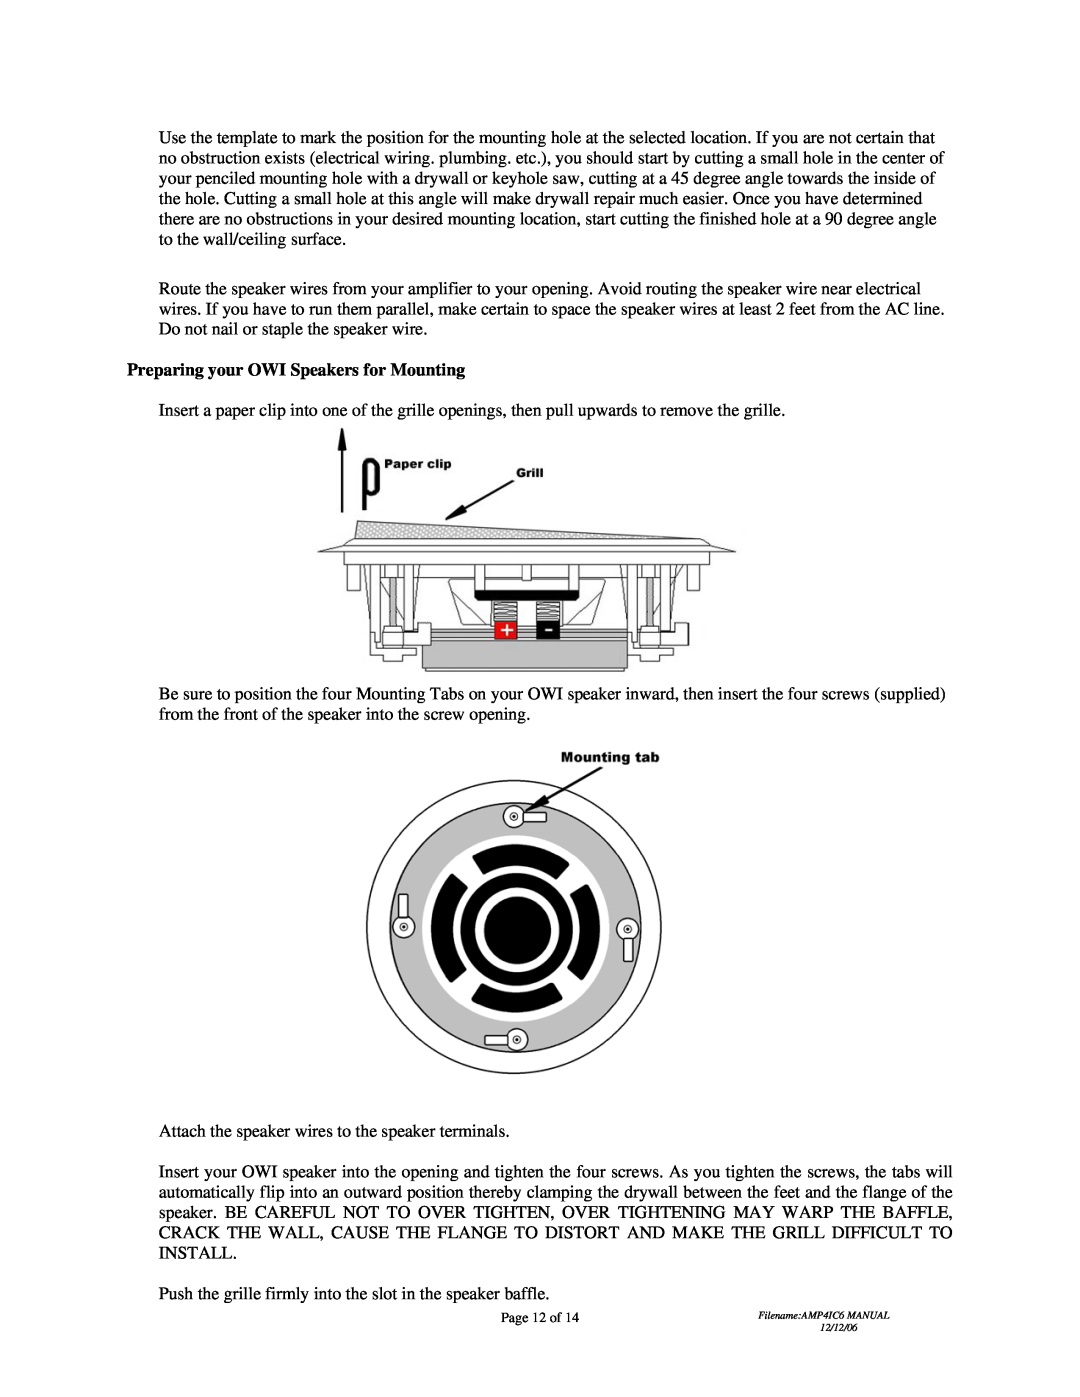 OWI AMP4IC6 installation instructions Preparing your OWI Speakers for Mounting 